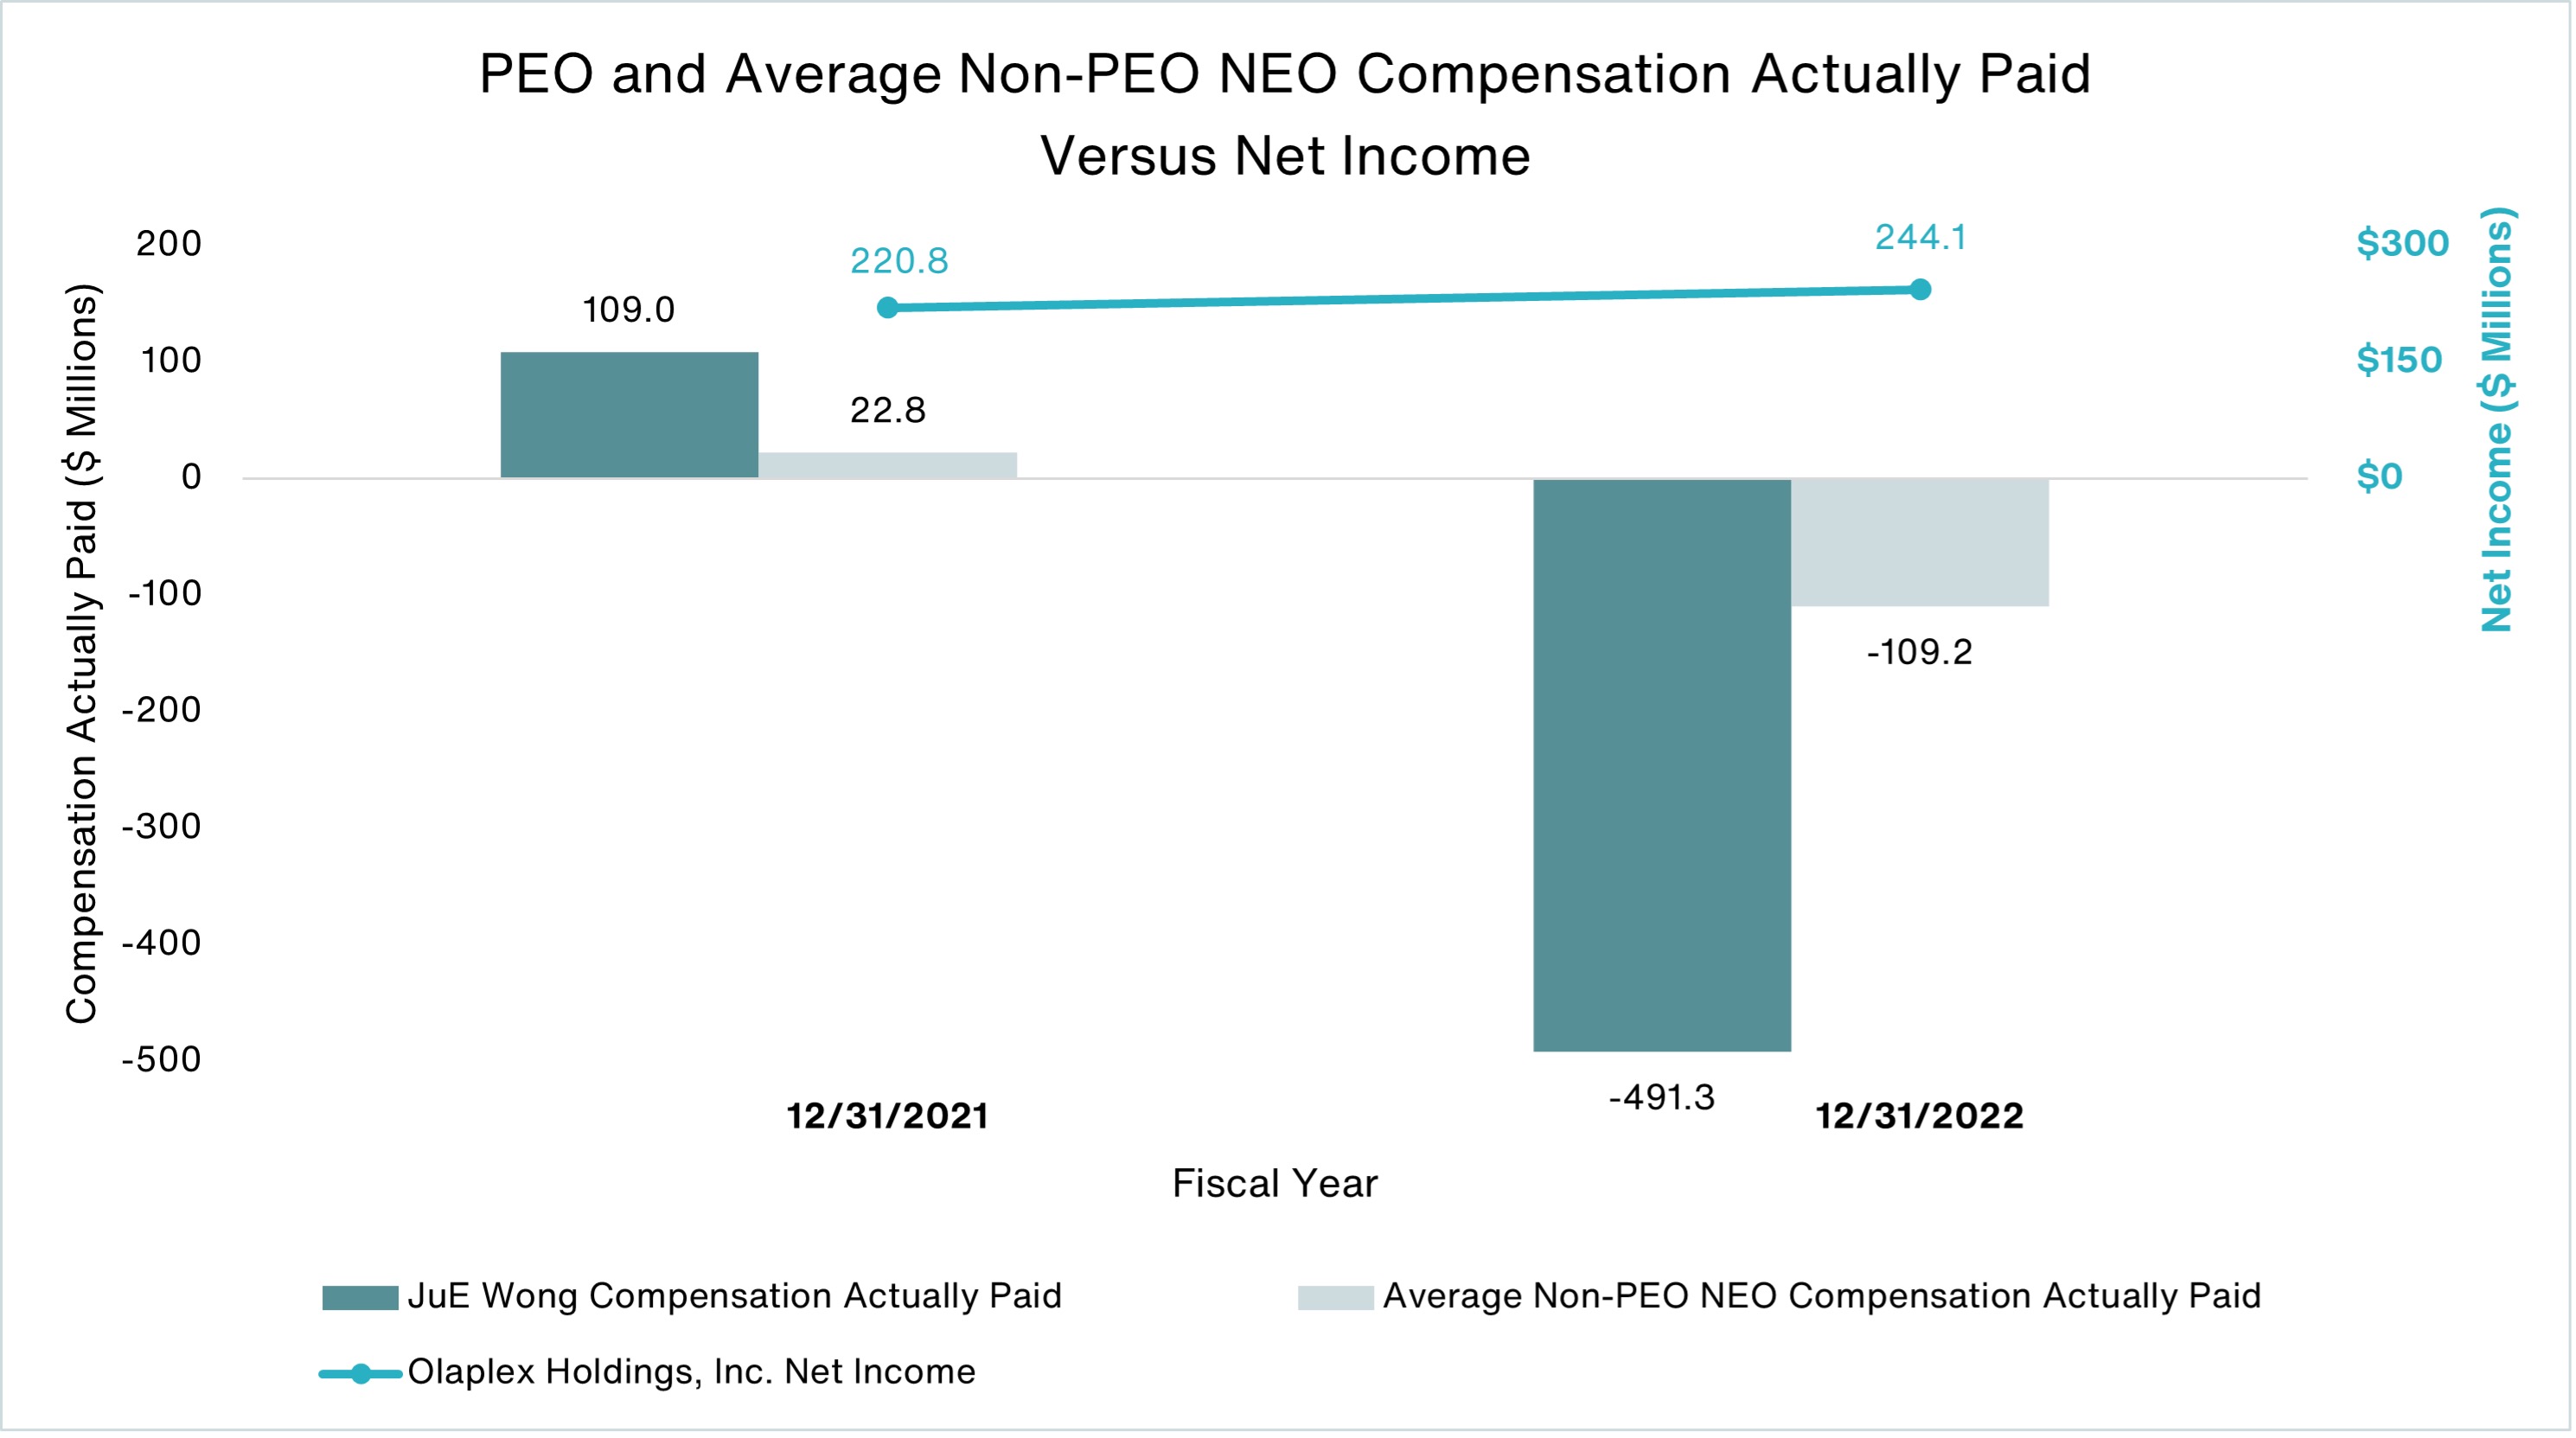 Trended Bar Chart of PEO and Average Non PEO NEO Compensation Actually Paid v. Net Income showing a decrease of compensation with an increase in NI